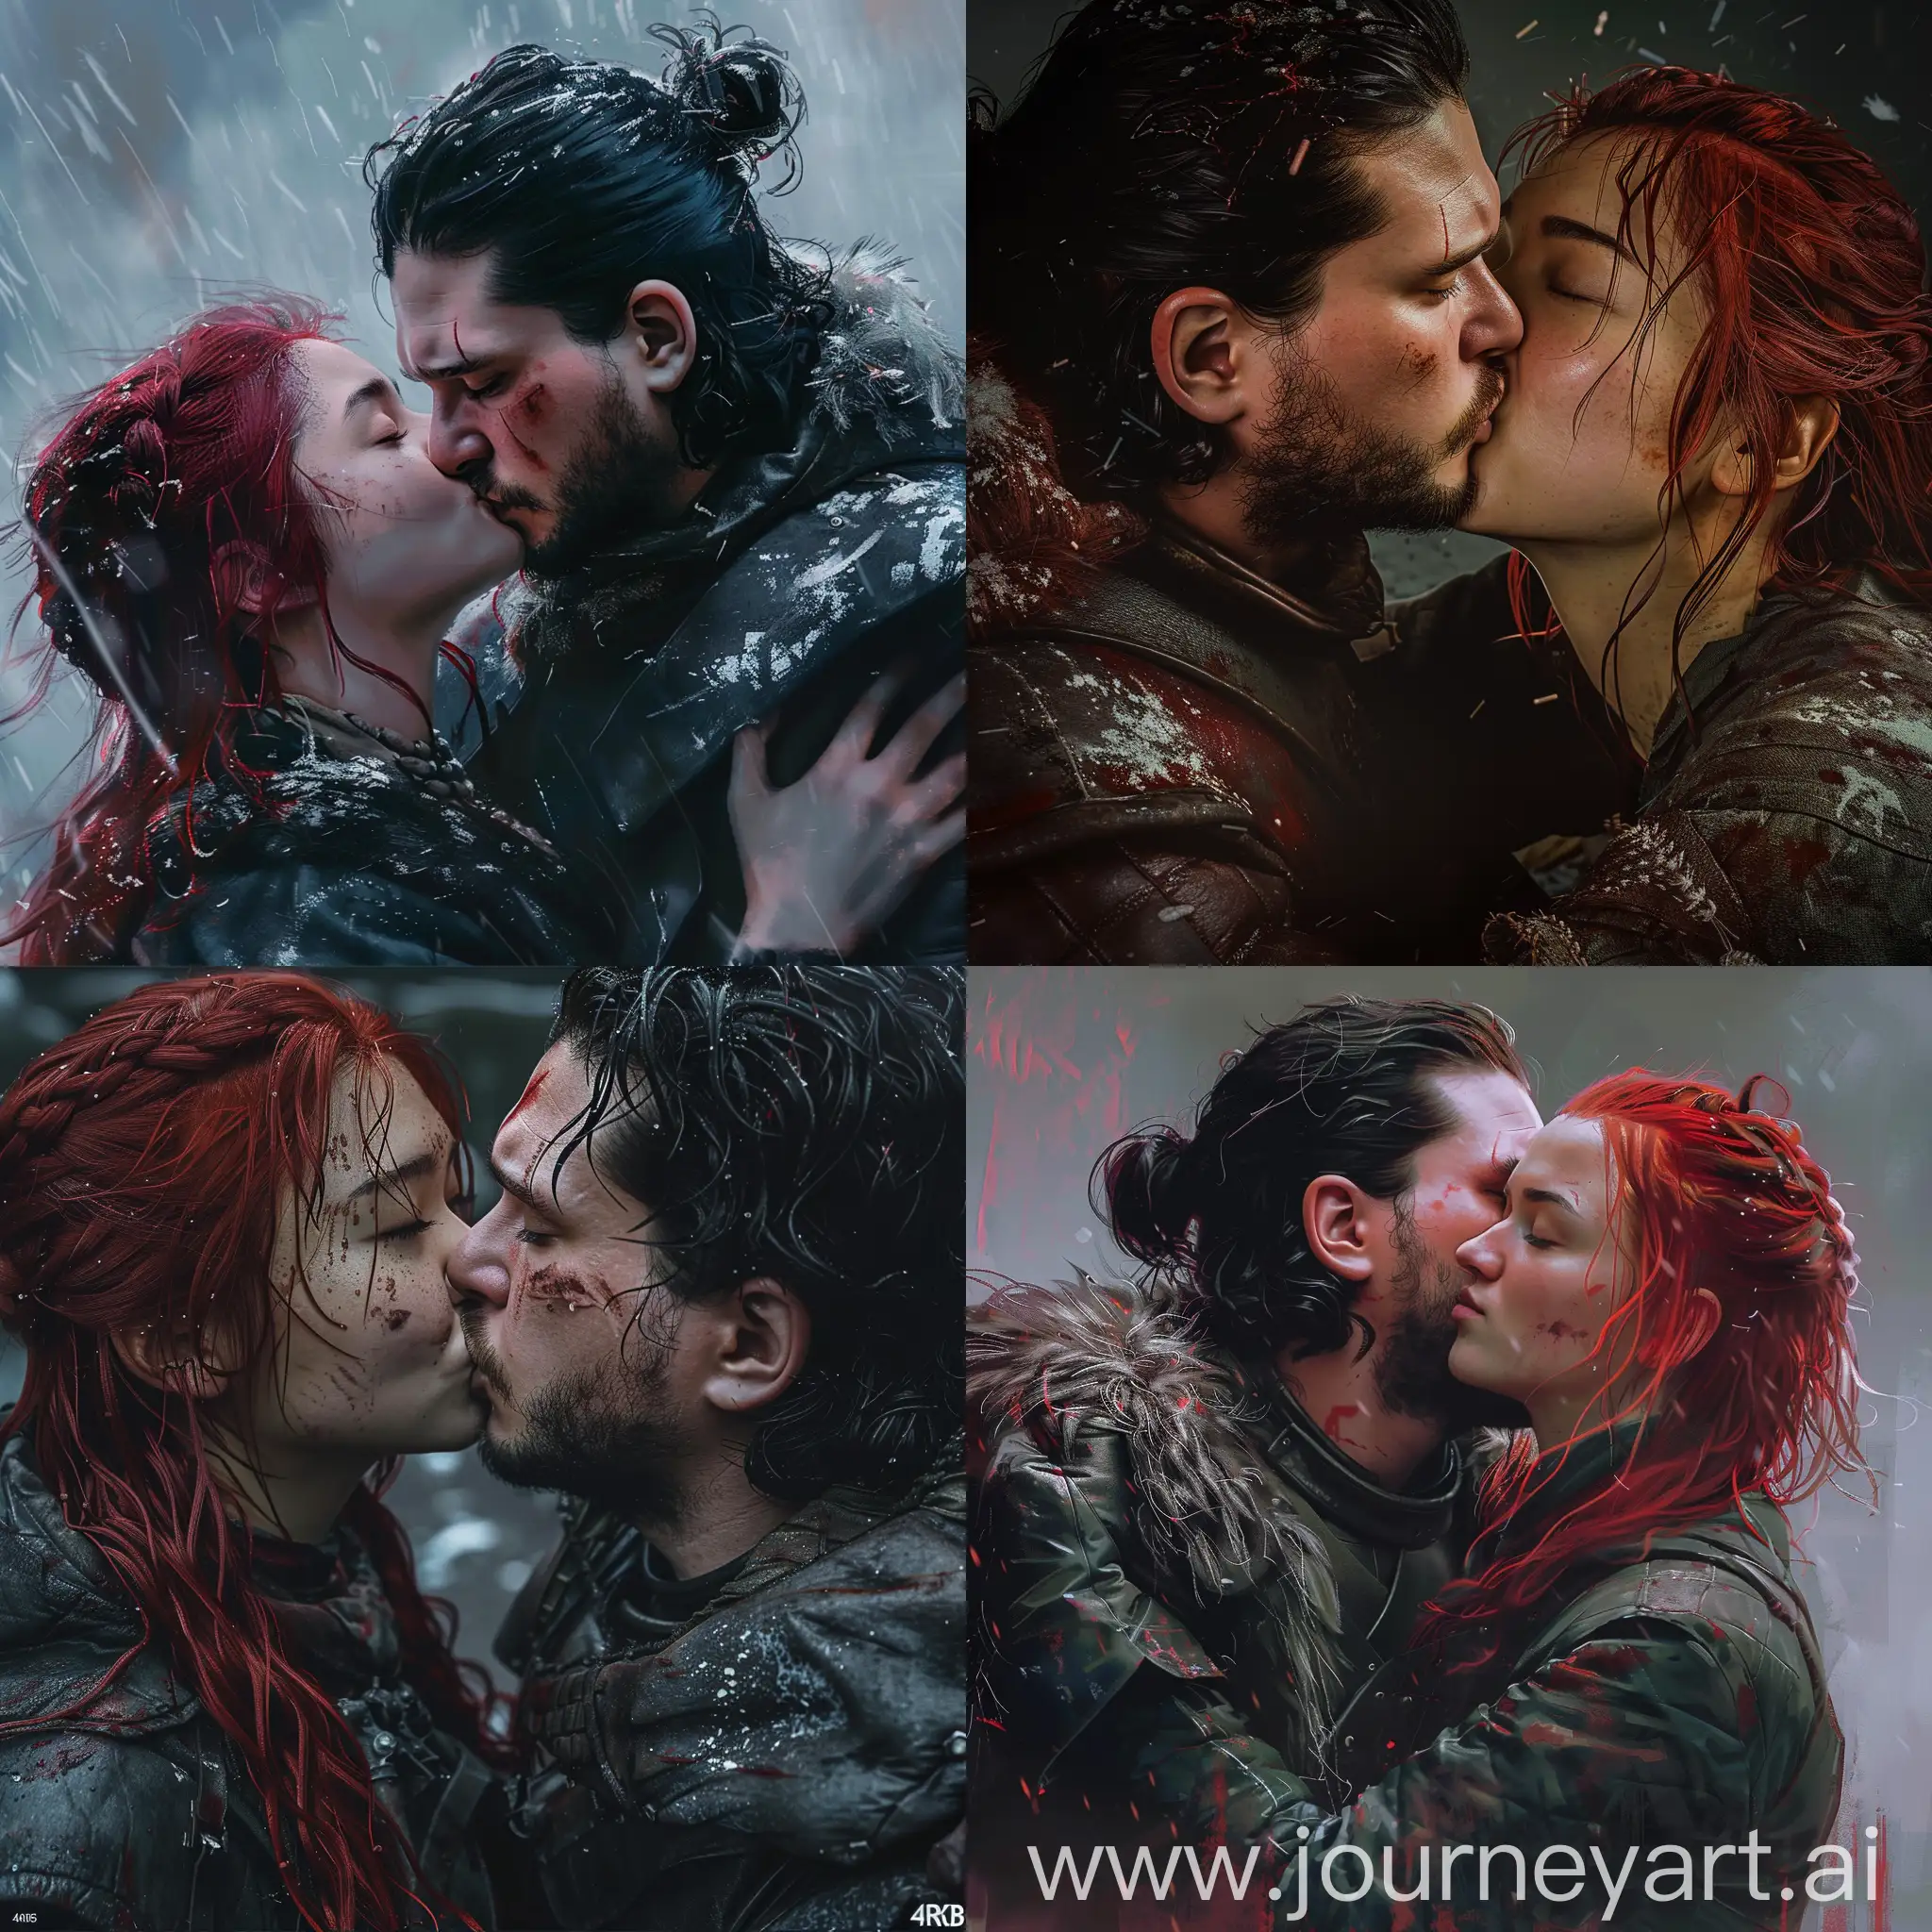 Jon Snow from game of thrones kisses asian girl with red hair, post apocalypses, "The last of us" game style and atmosphere, 4K 